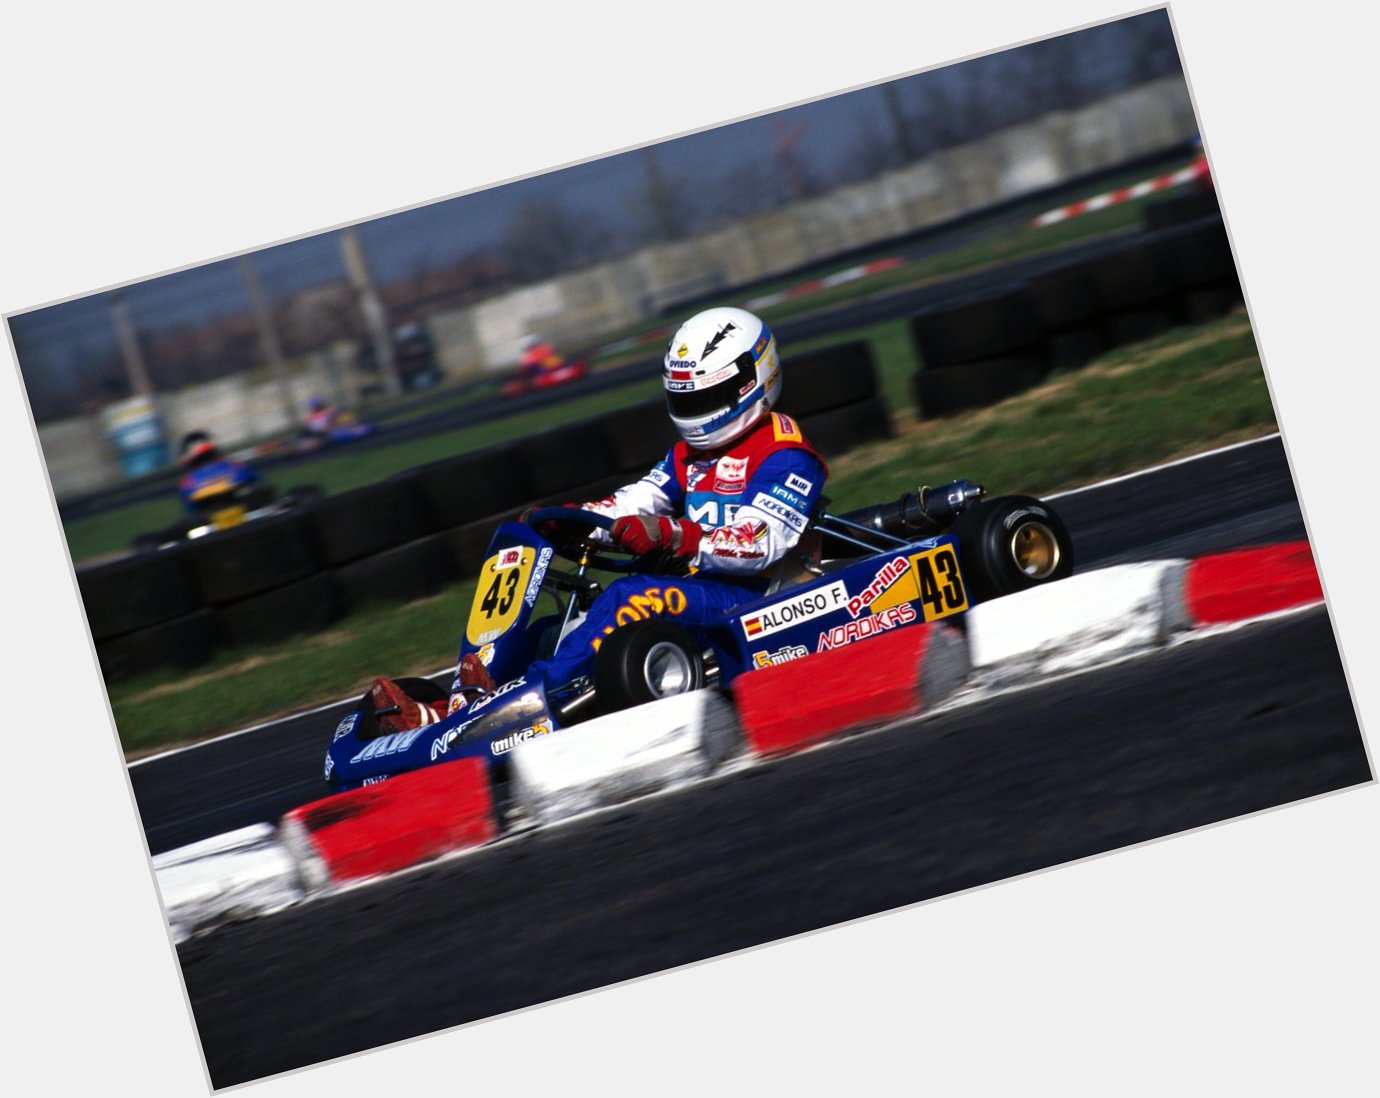 Fernando Alonso is 34 today - Happy Birthday, Fernando! Here he is as a karting star, back in his teenage years... 